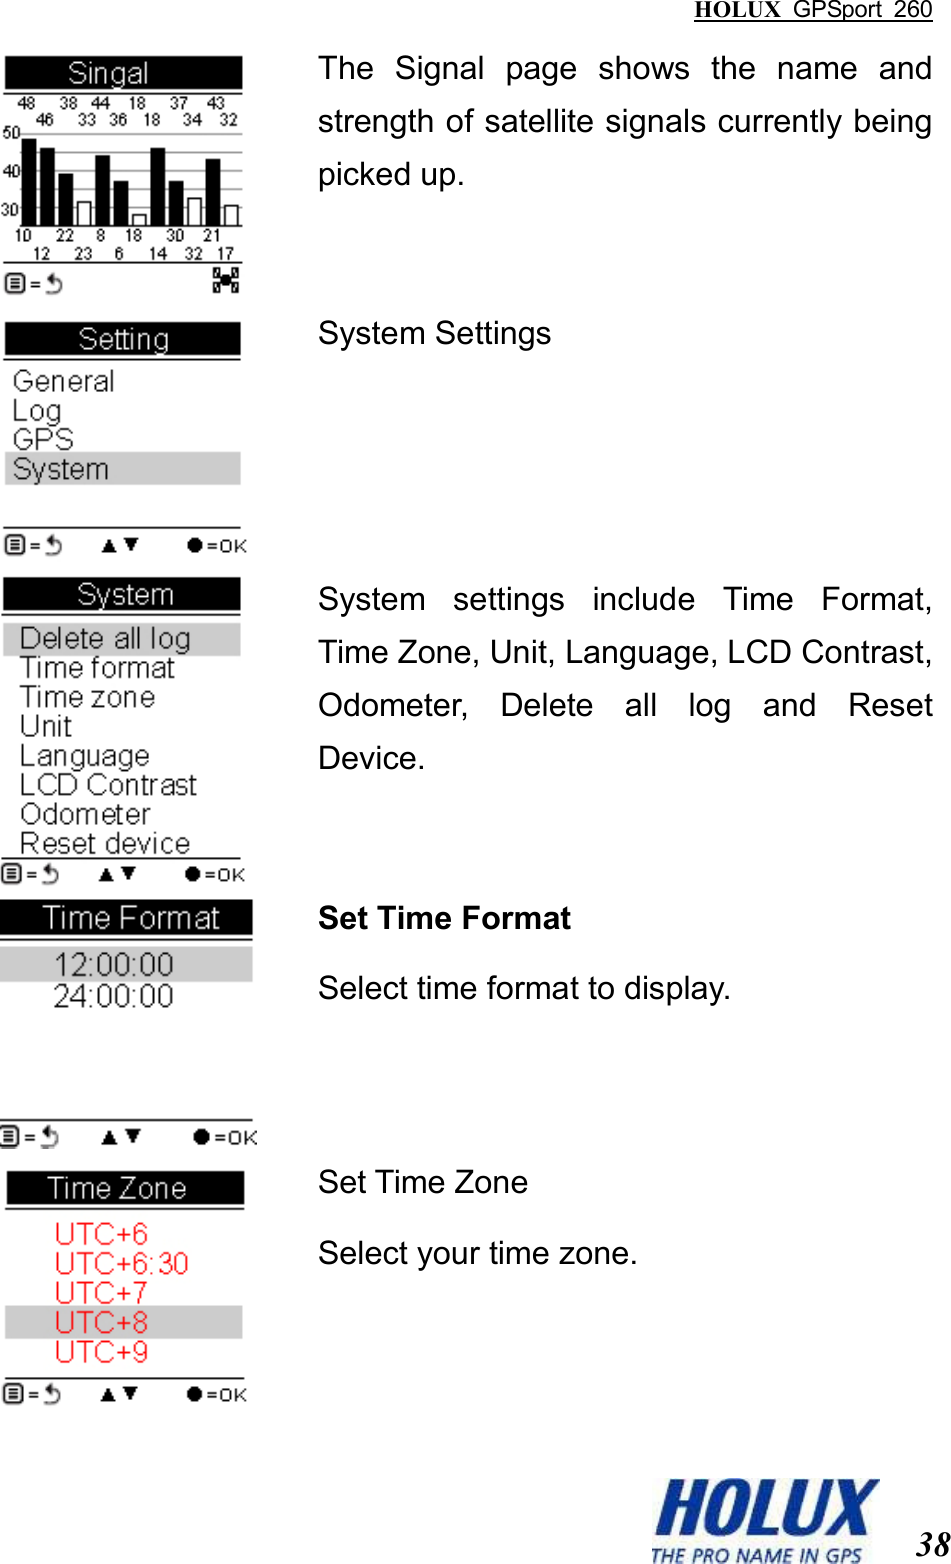 HOLUX  GPSport  260  38  The  Signal  page  shows  the  name  and strength of satellite signals currently being picked up.  System Settings  System  settings  include  Time  Format, Time Zone, Unit, Language, LCD Contrast, Odometer,  Delete  all  log  and  Reset Device.  Set Time Format Select time format to display.  Set Time Zone Select your time zone. 